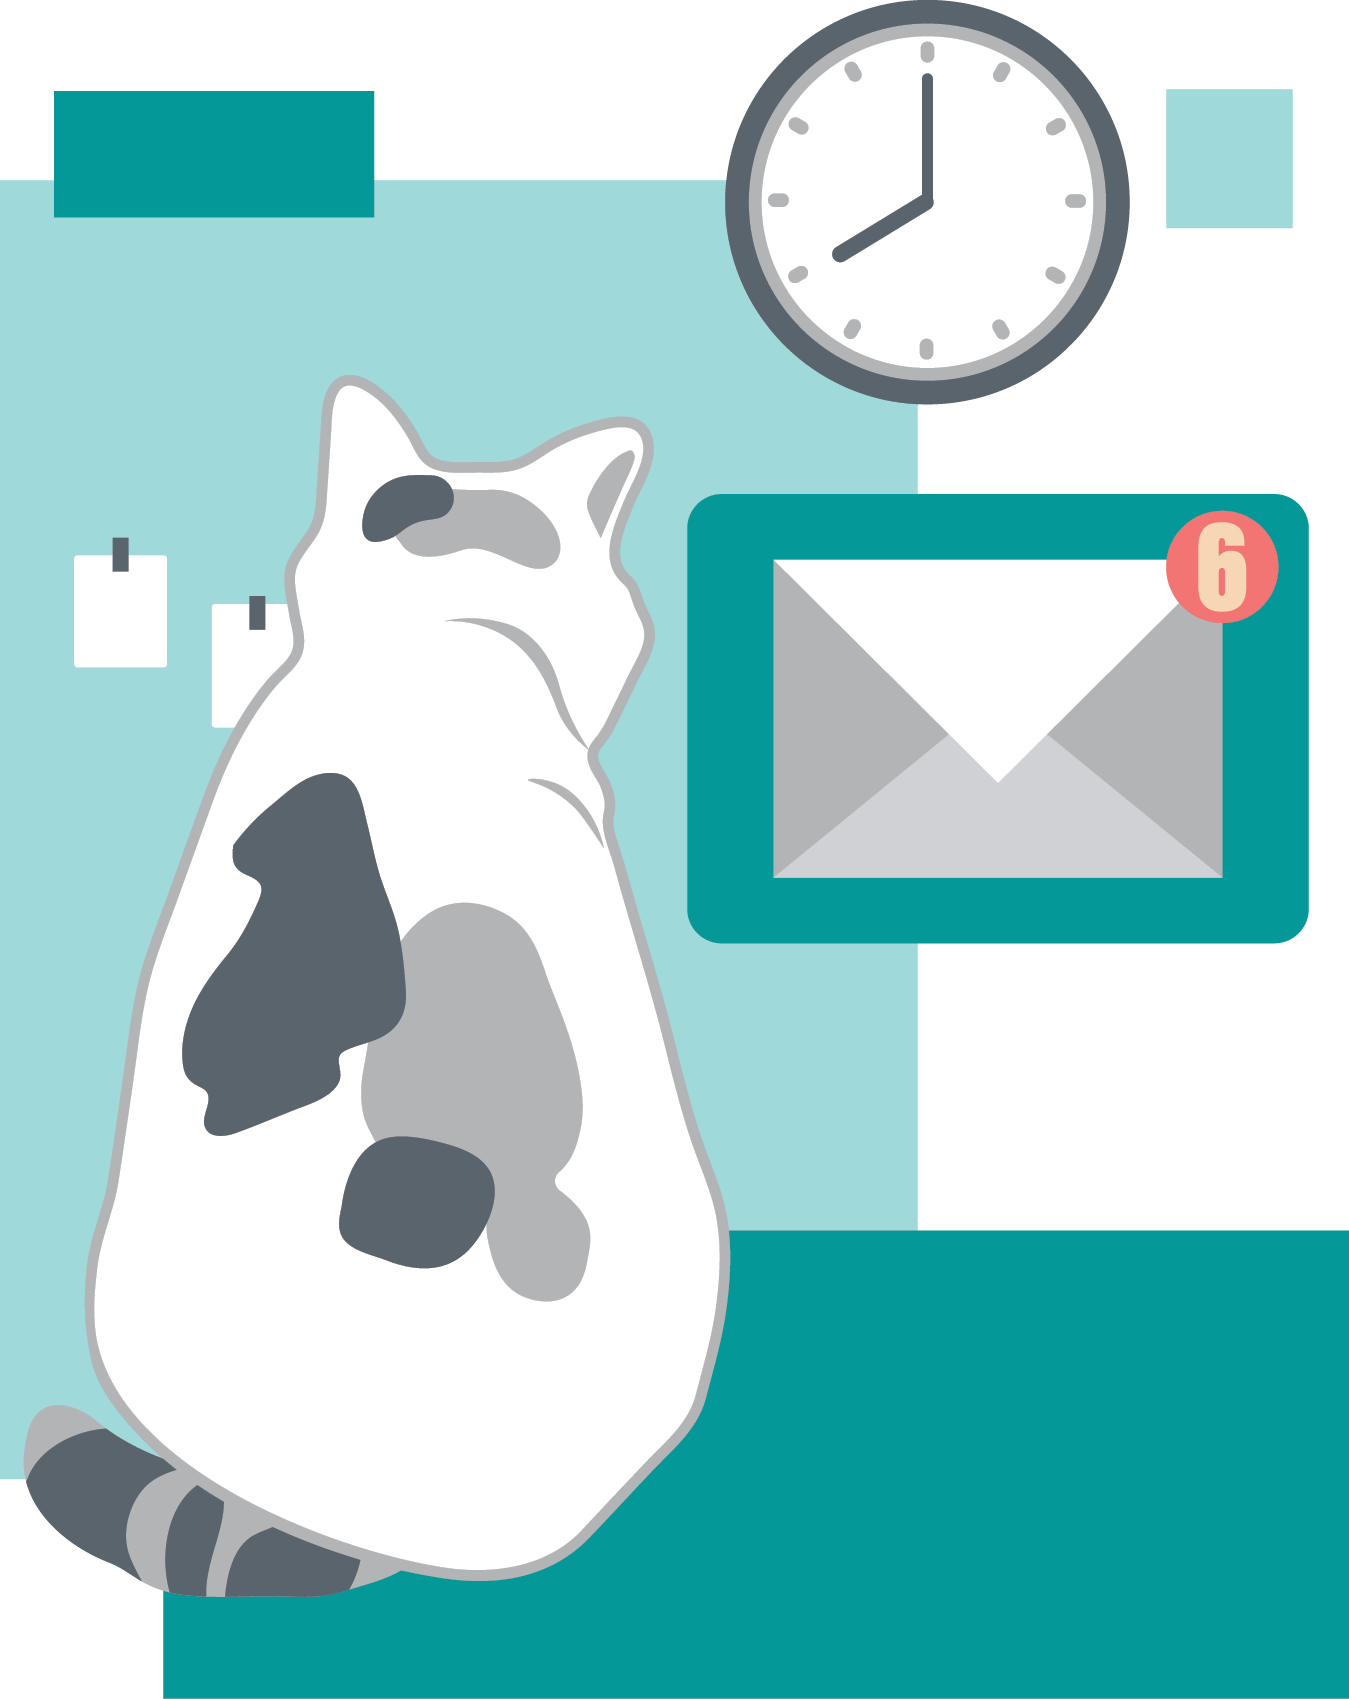 Cat looking at email notification icon and clock on wall